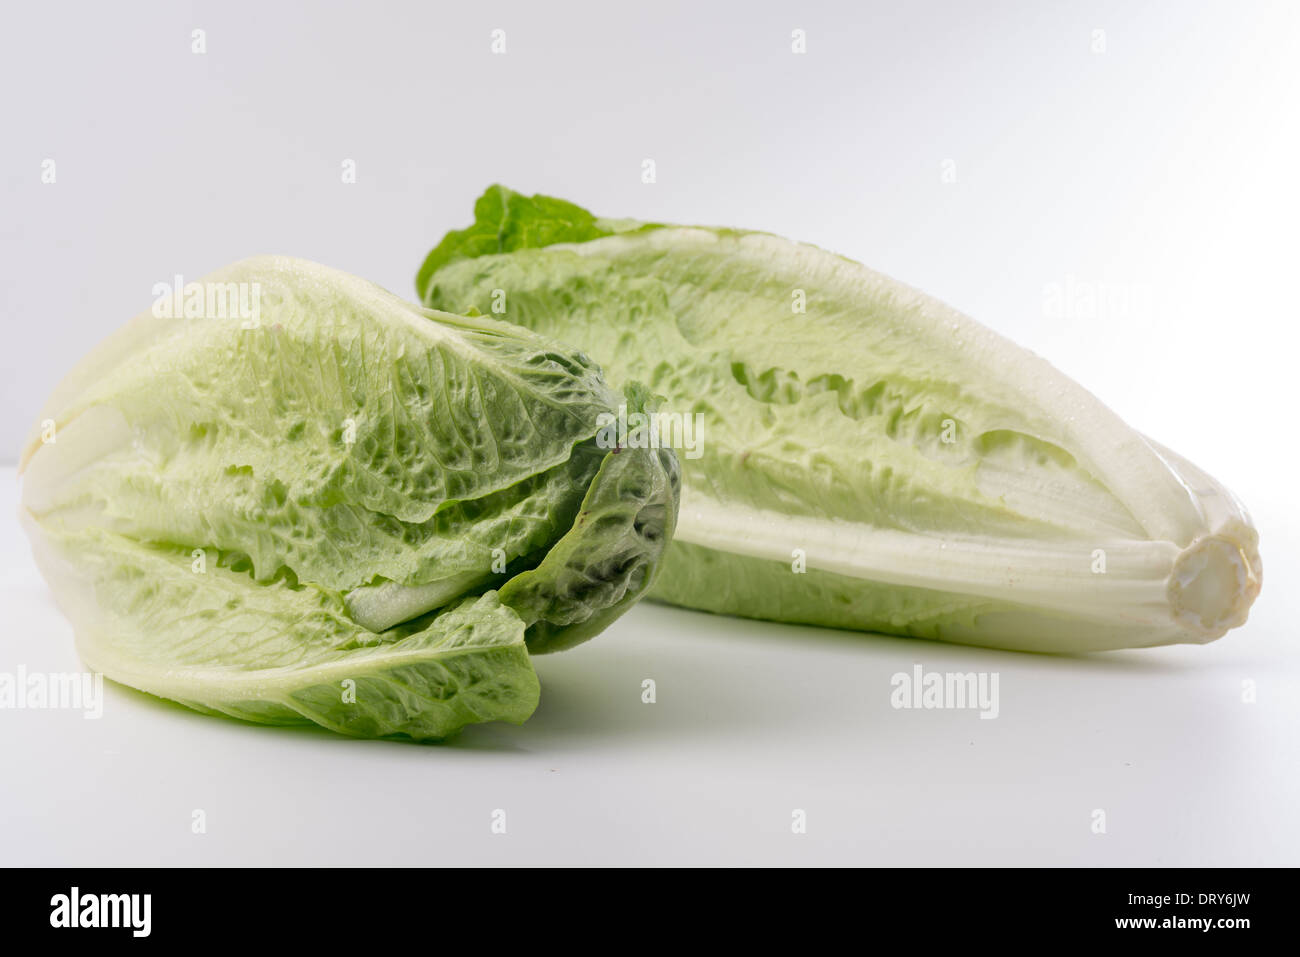 Romaine Lettuce-Lactuca sativa,on white background,cut-out Stock Photo